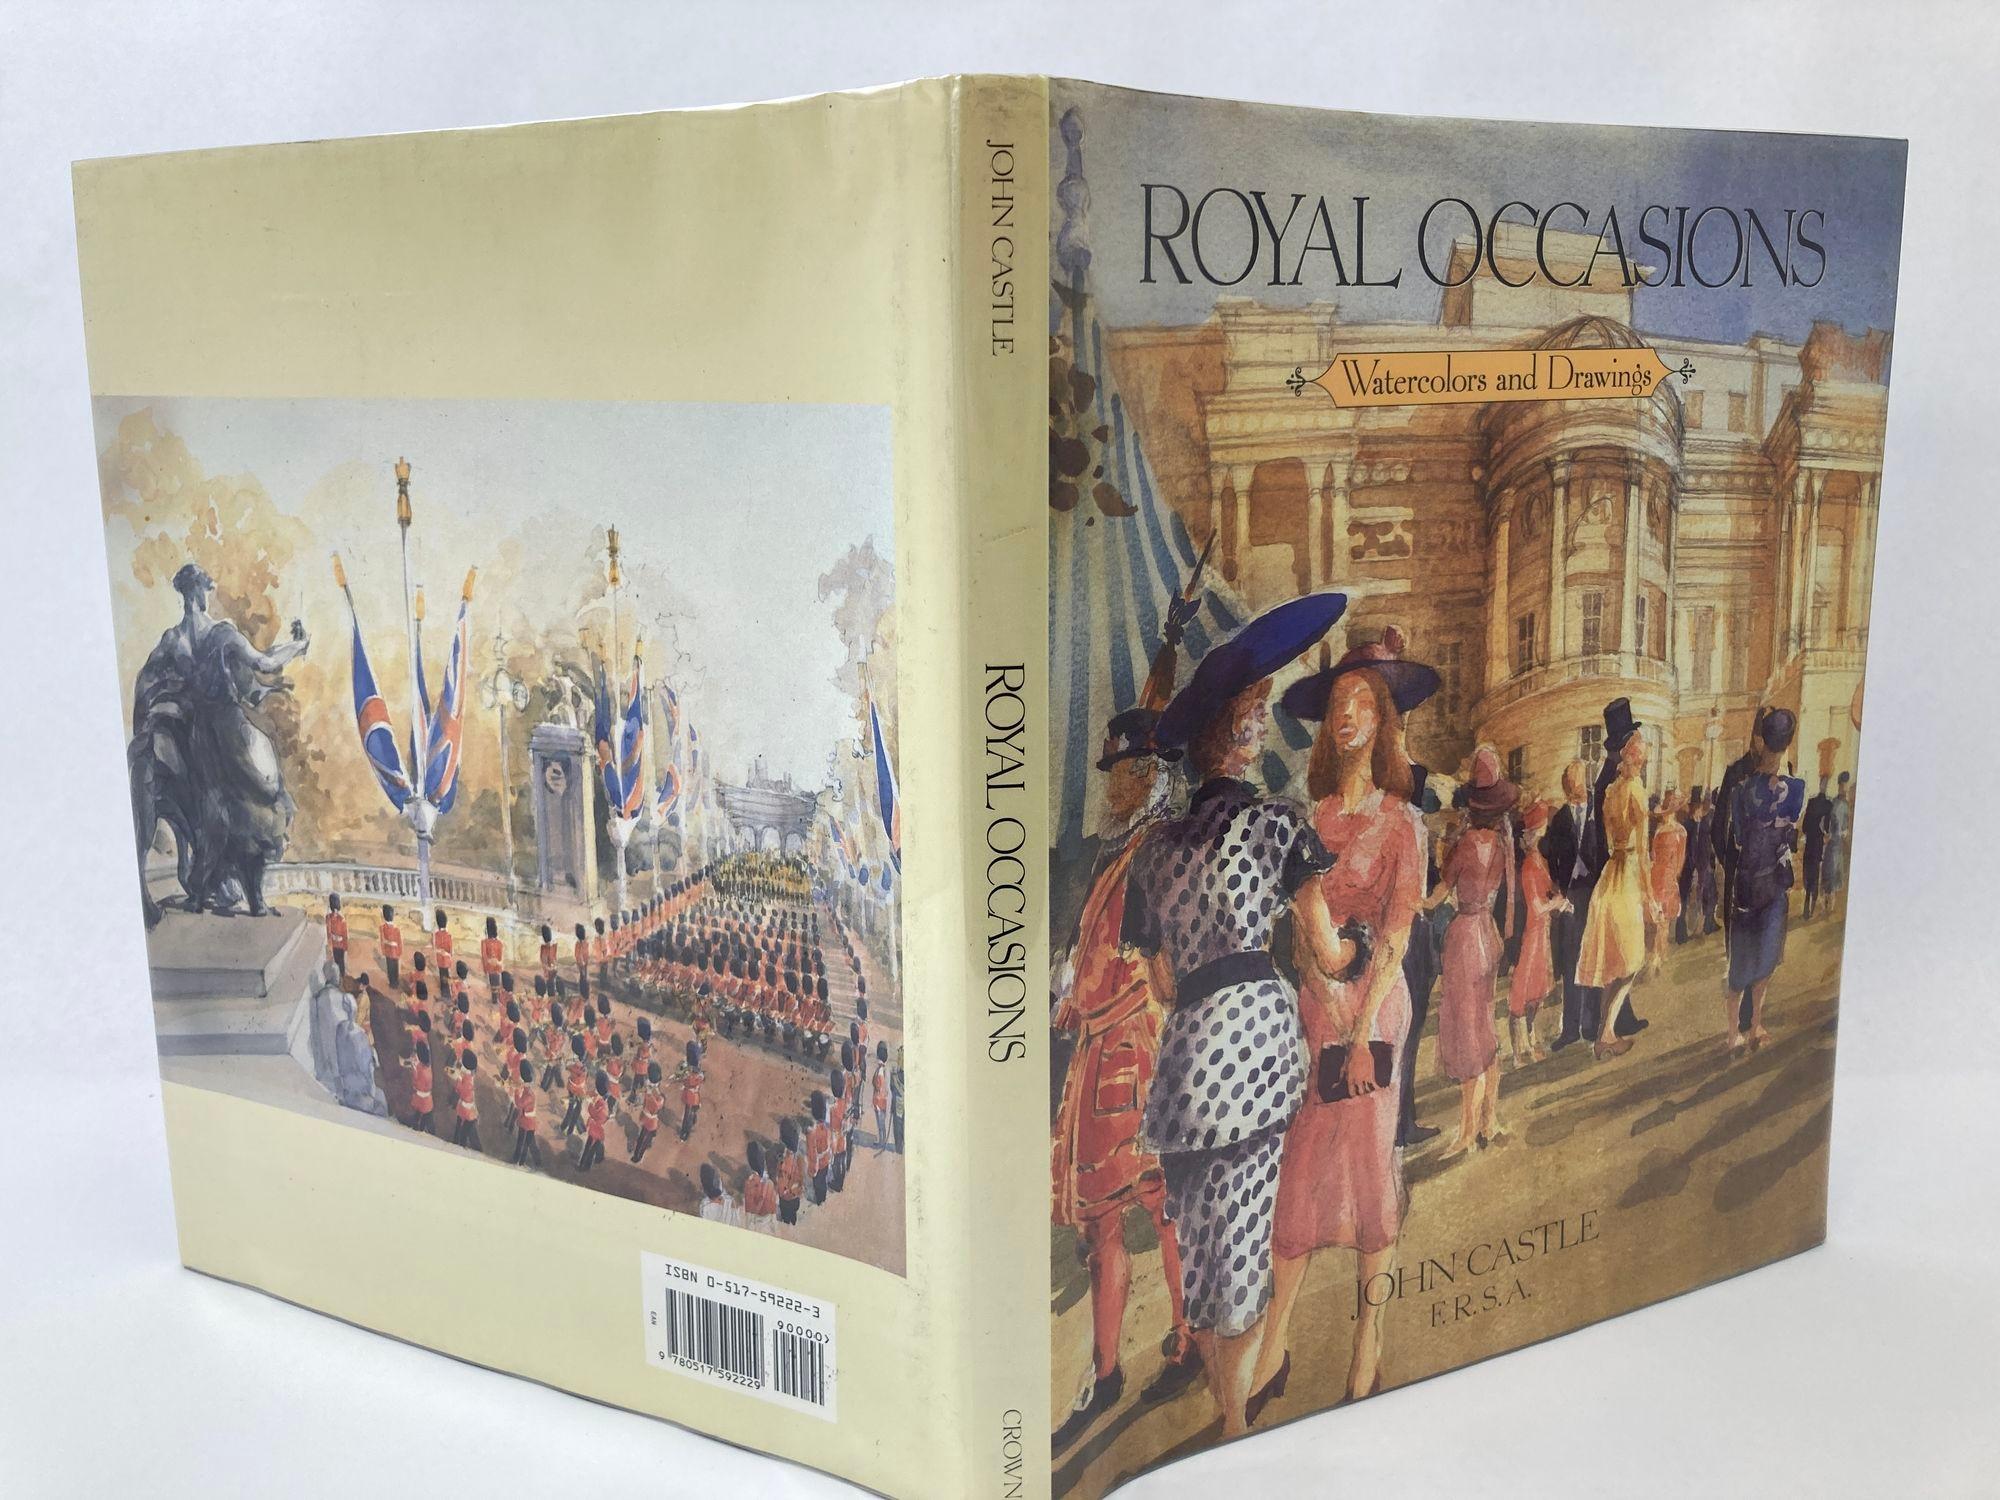 Royal Occasions: Watercolors and Drawings by John Castle Hardcover Book In Good Condition For Sale In North Hollywood, CA